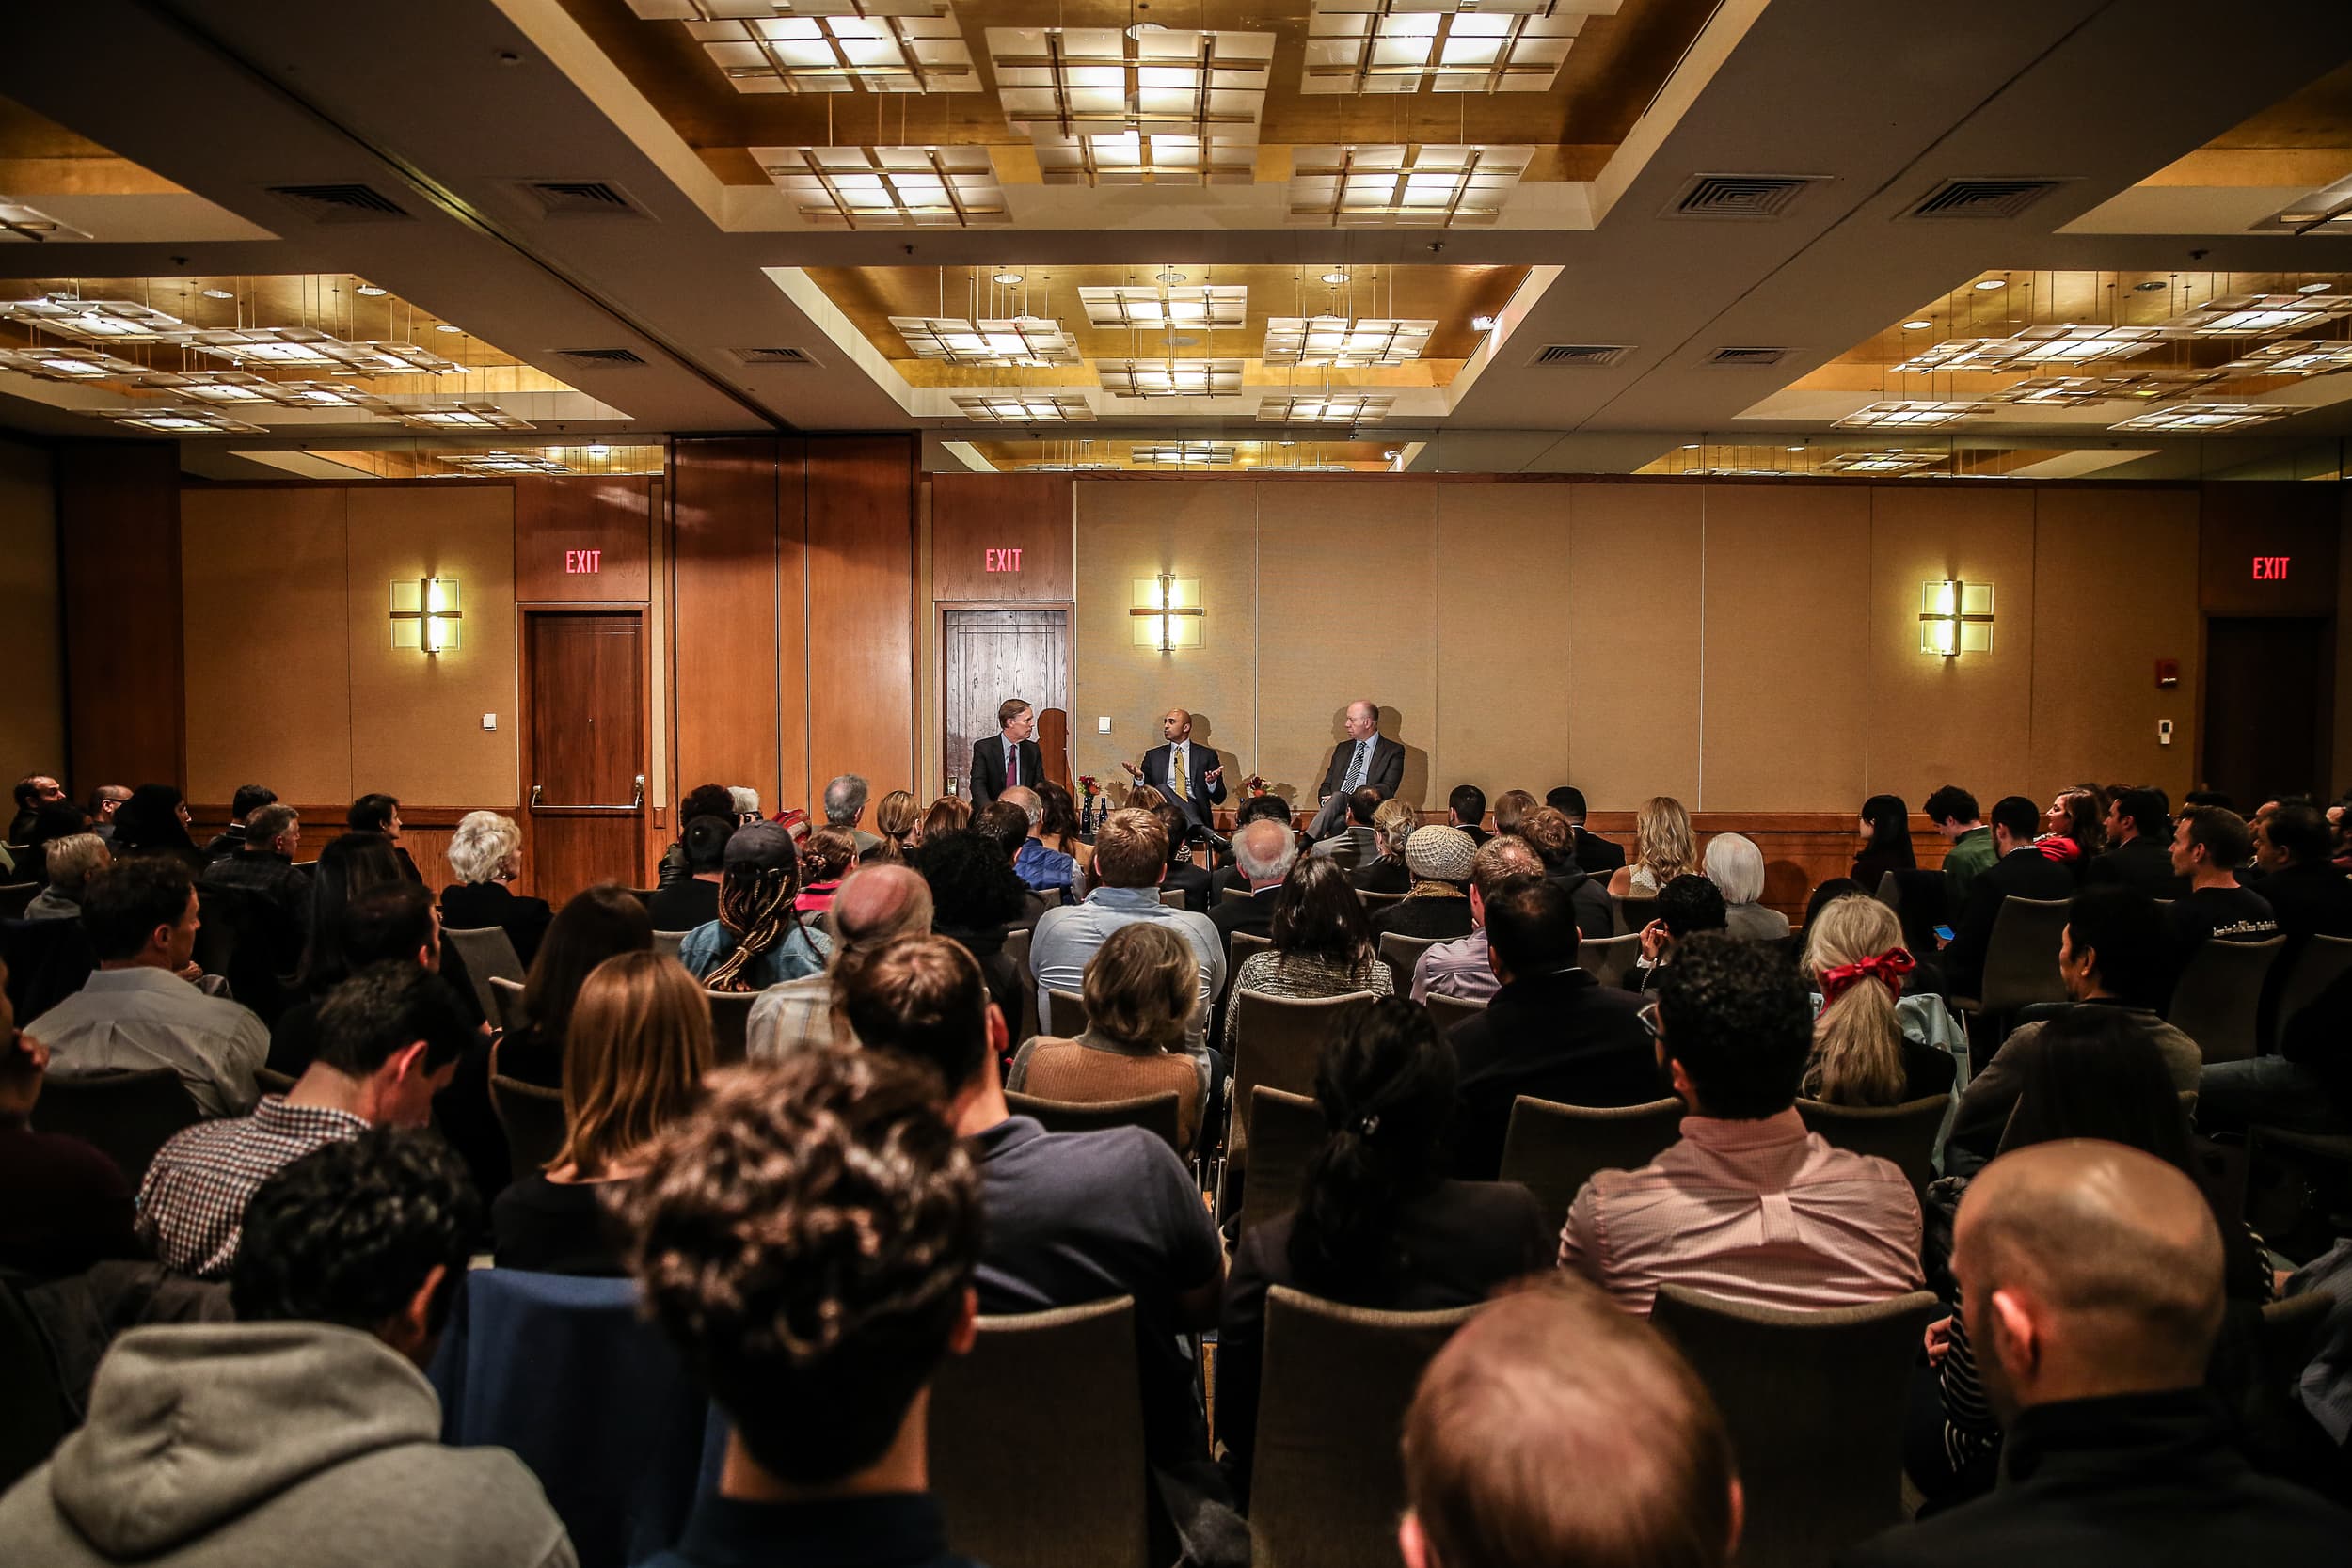 Ambassador Yousef Al Otaiba, Harvard University Senior Visiting Fellow joins Professors Nicholas Burns and David Gergen on a panel discussing Middle East leadership, foreign policy, governance and UAE's innovation initiatives with Kennedy School students, faculty and the wider Cambridge community in attendance during the ambassador's outreach trip to Boston in October 2016